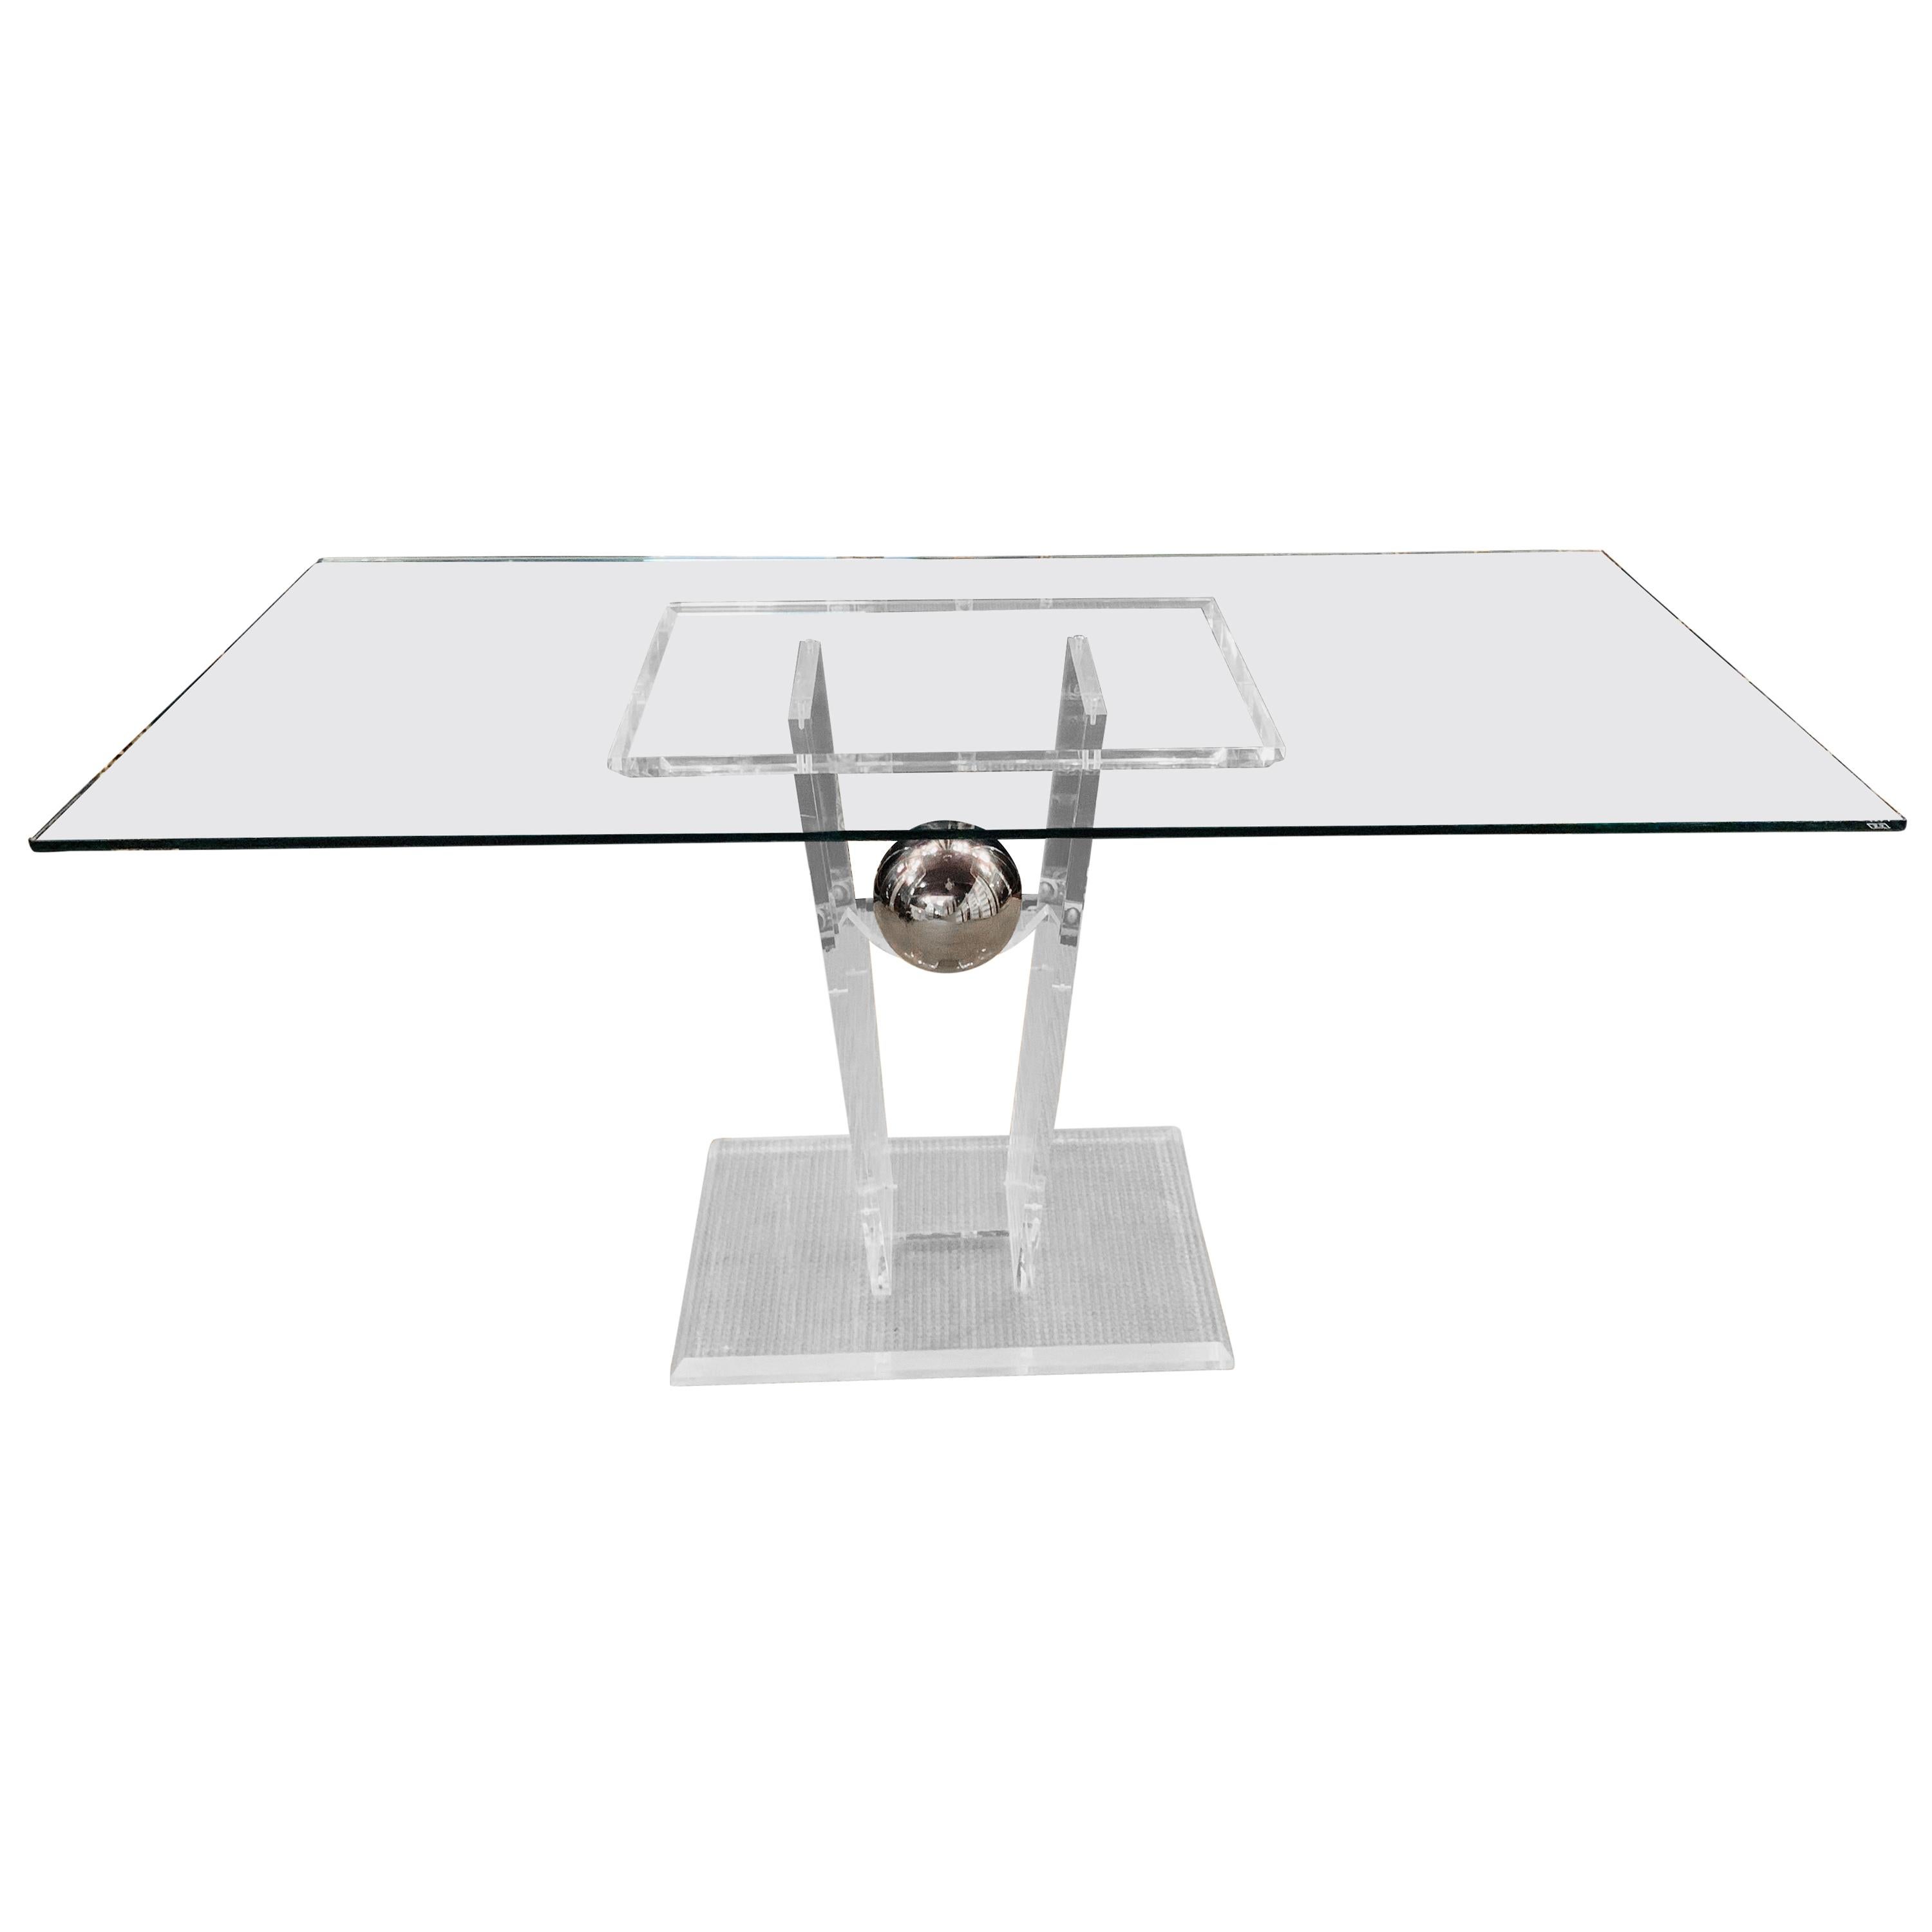 High Quality Acrylic Dining Table with Rectangular Glass Top glazed